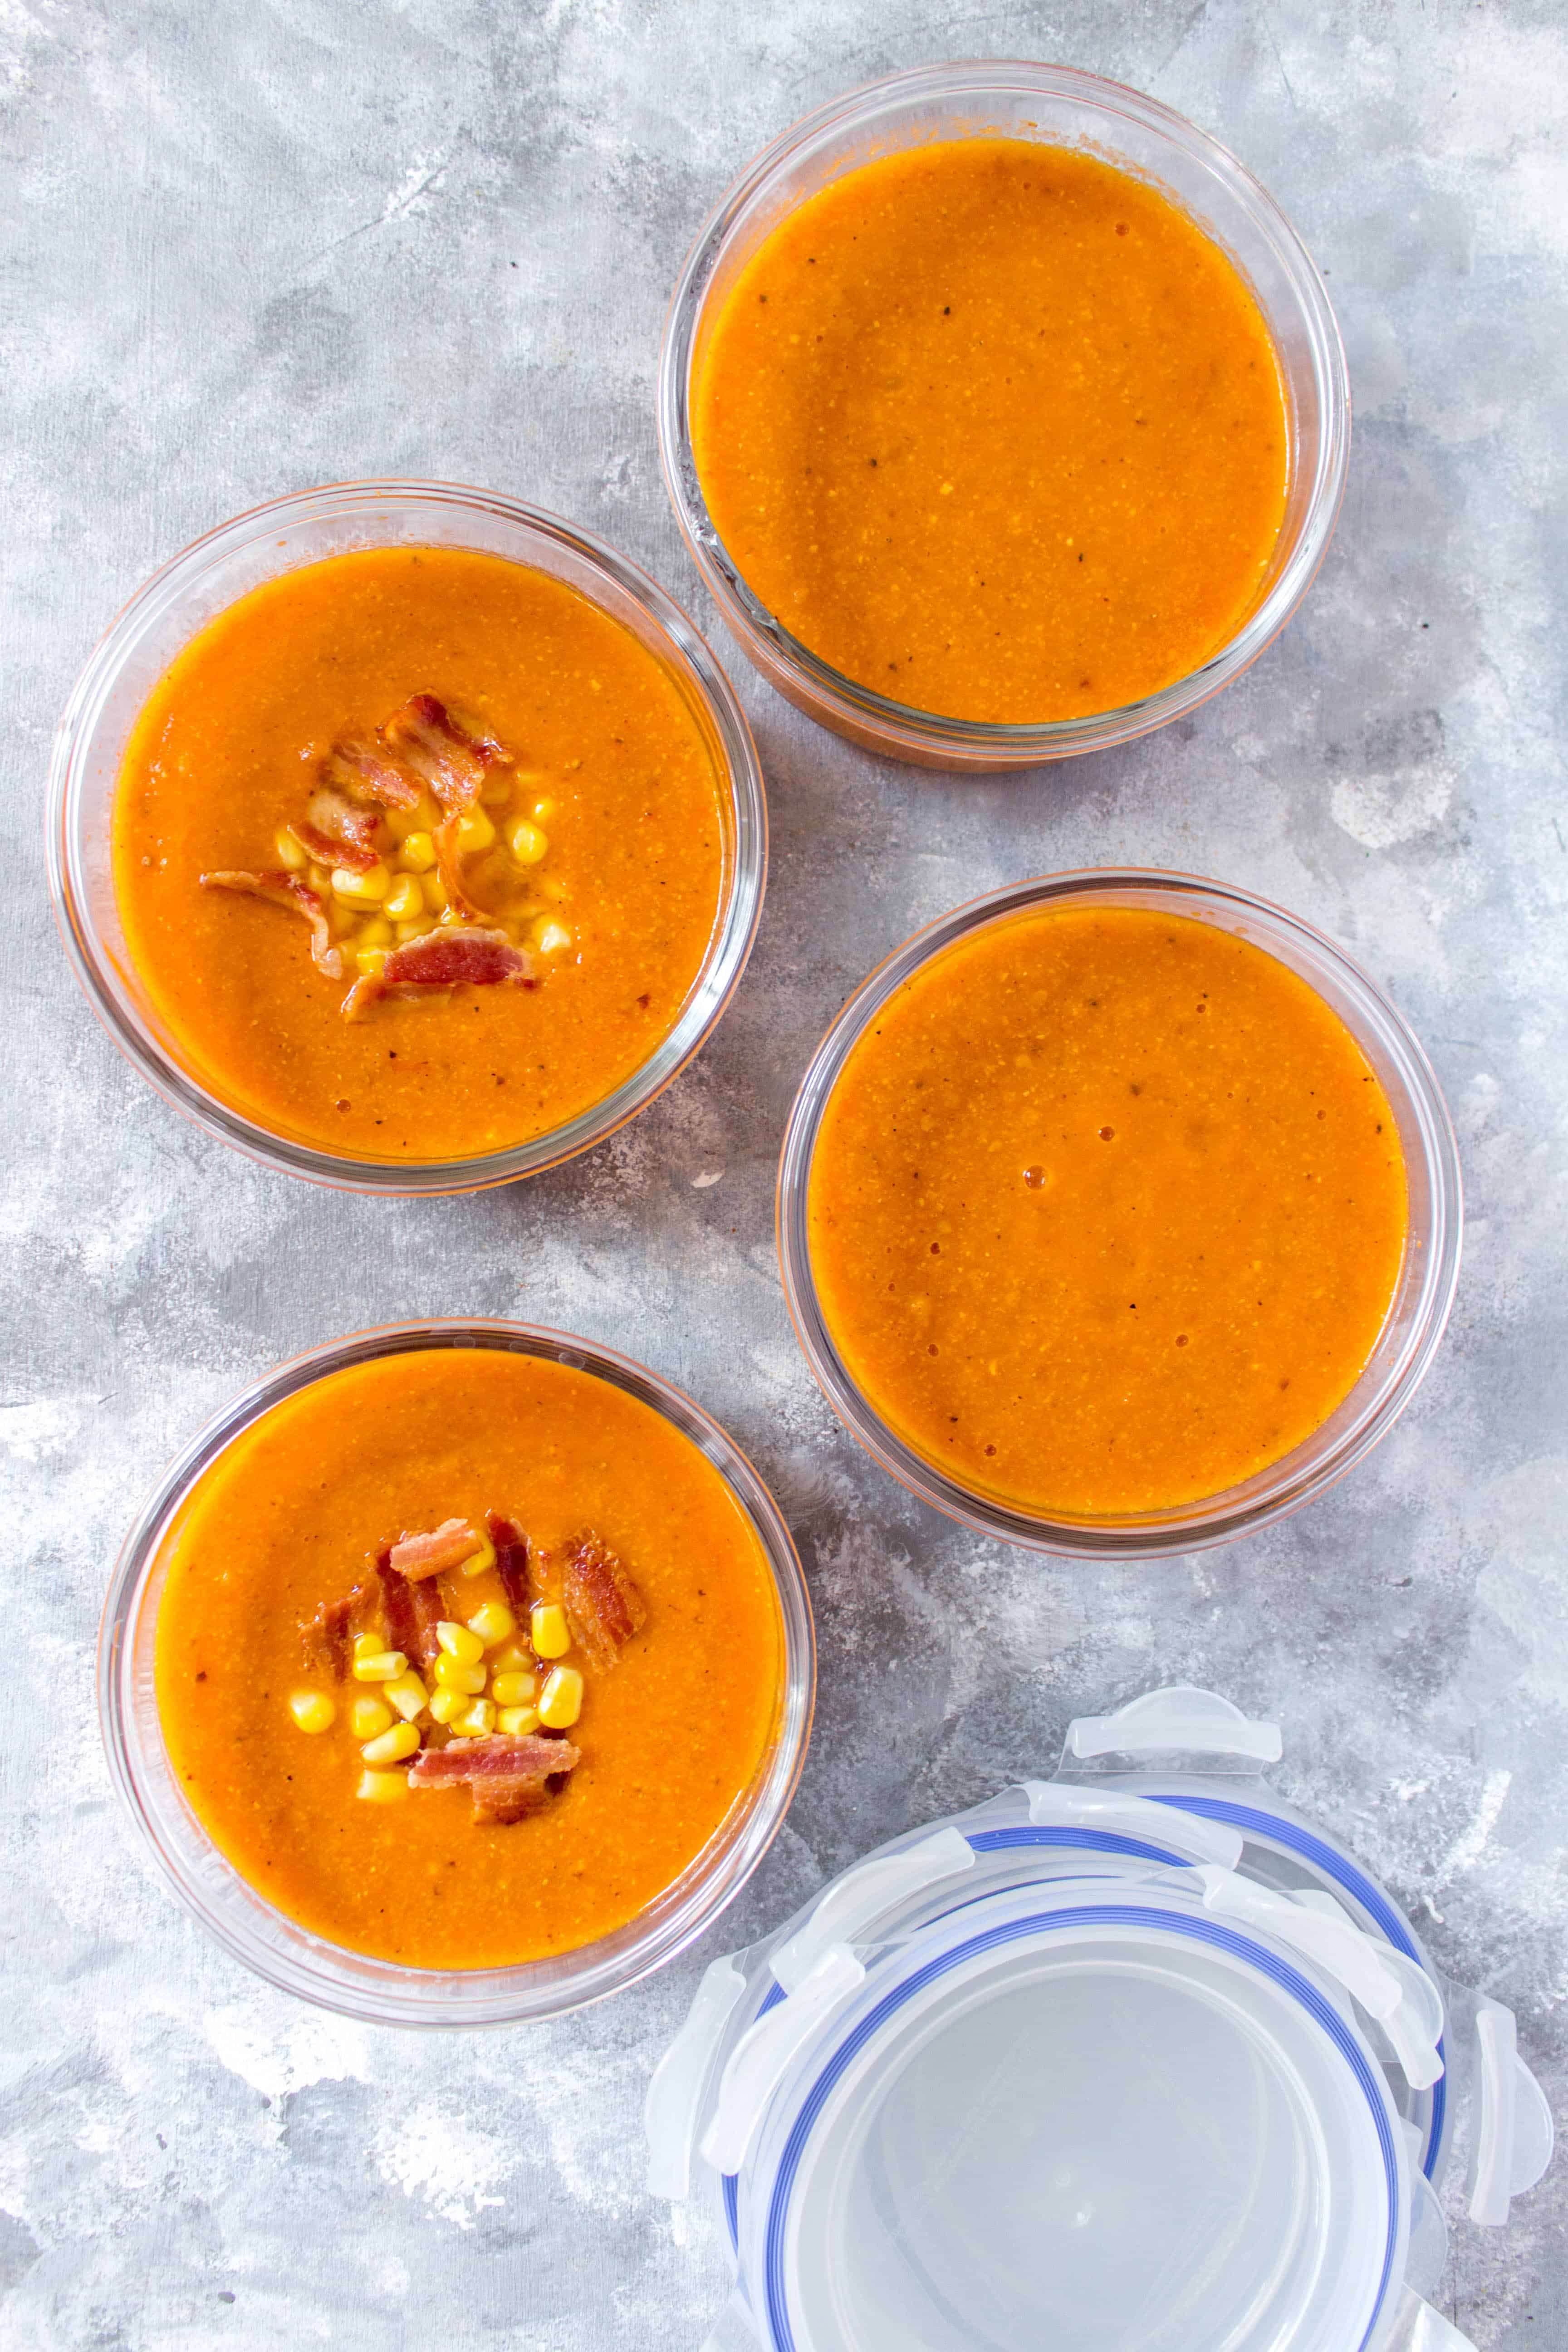 Soup Meal Prep | This smoky roasted corn and tomato soup is packed full of multiple layers of flavours. You're never going to want to go back to canned tomato soup after trying this delicious smoky homemade version.